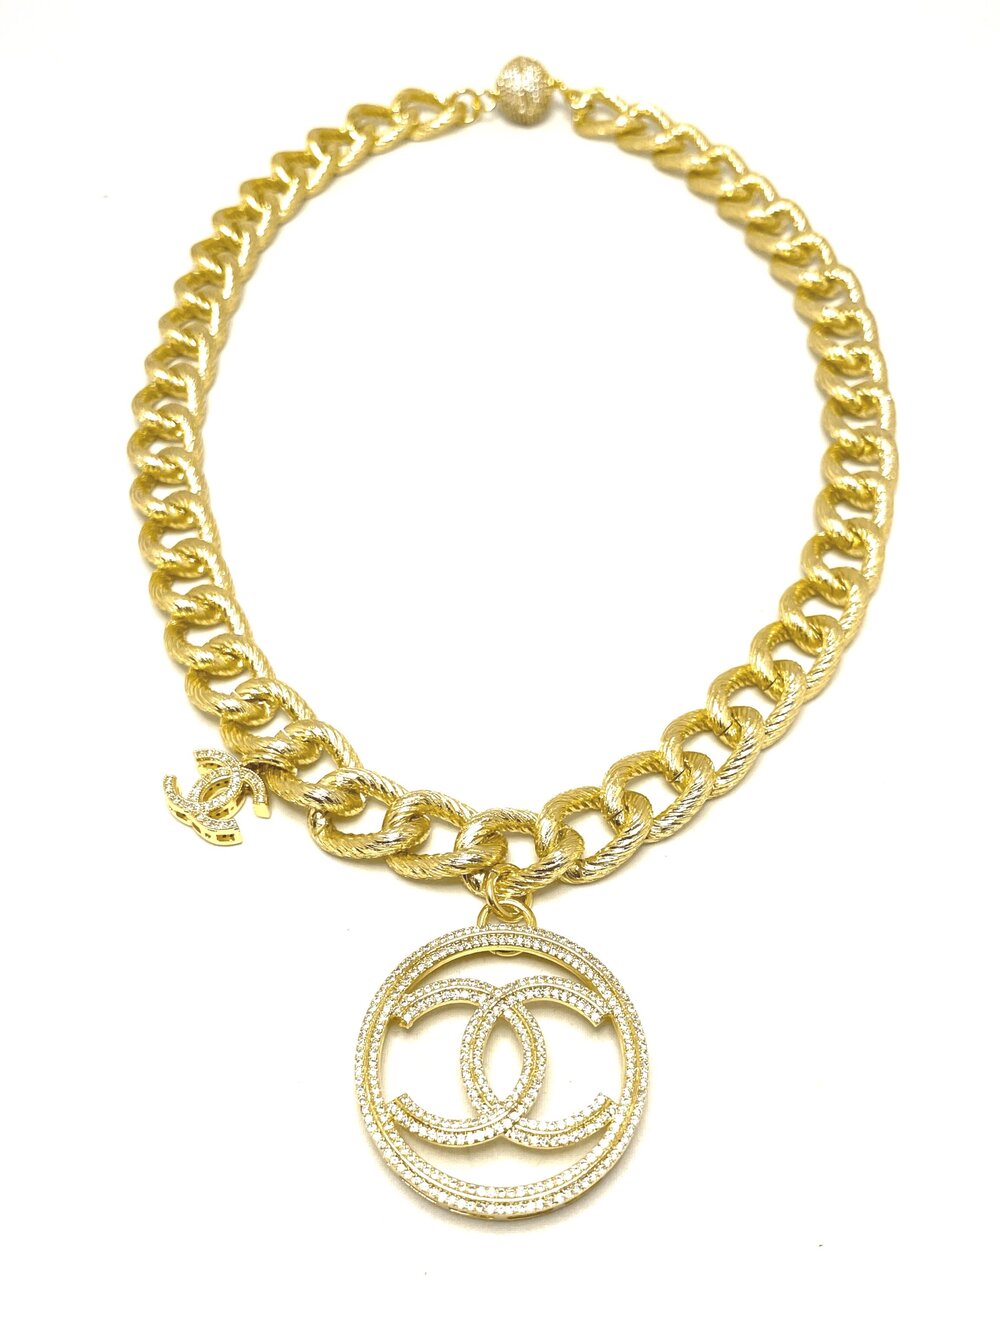 Gold Replicated Chanel Medallion Necklace/Bracelet with Magnetic Clasp —  Lisa Zipperer Designs